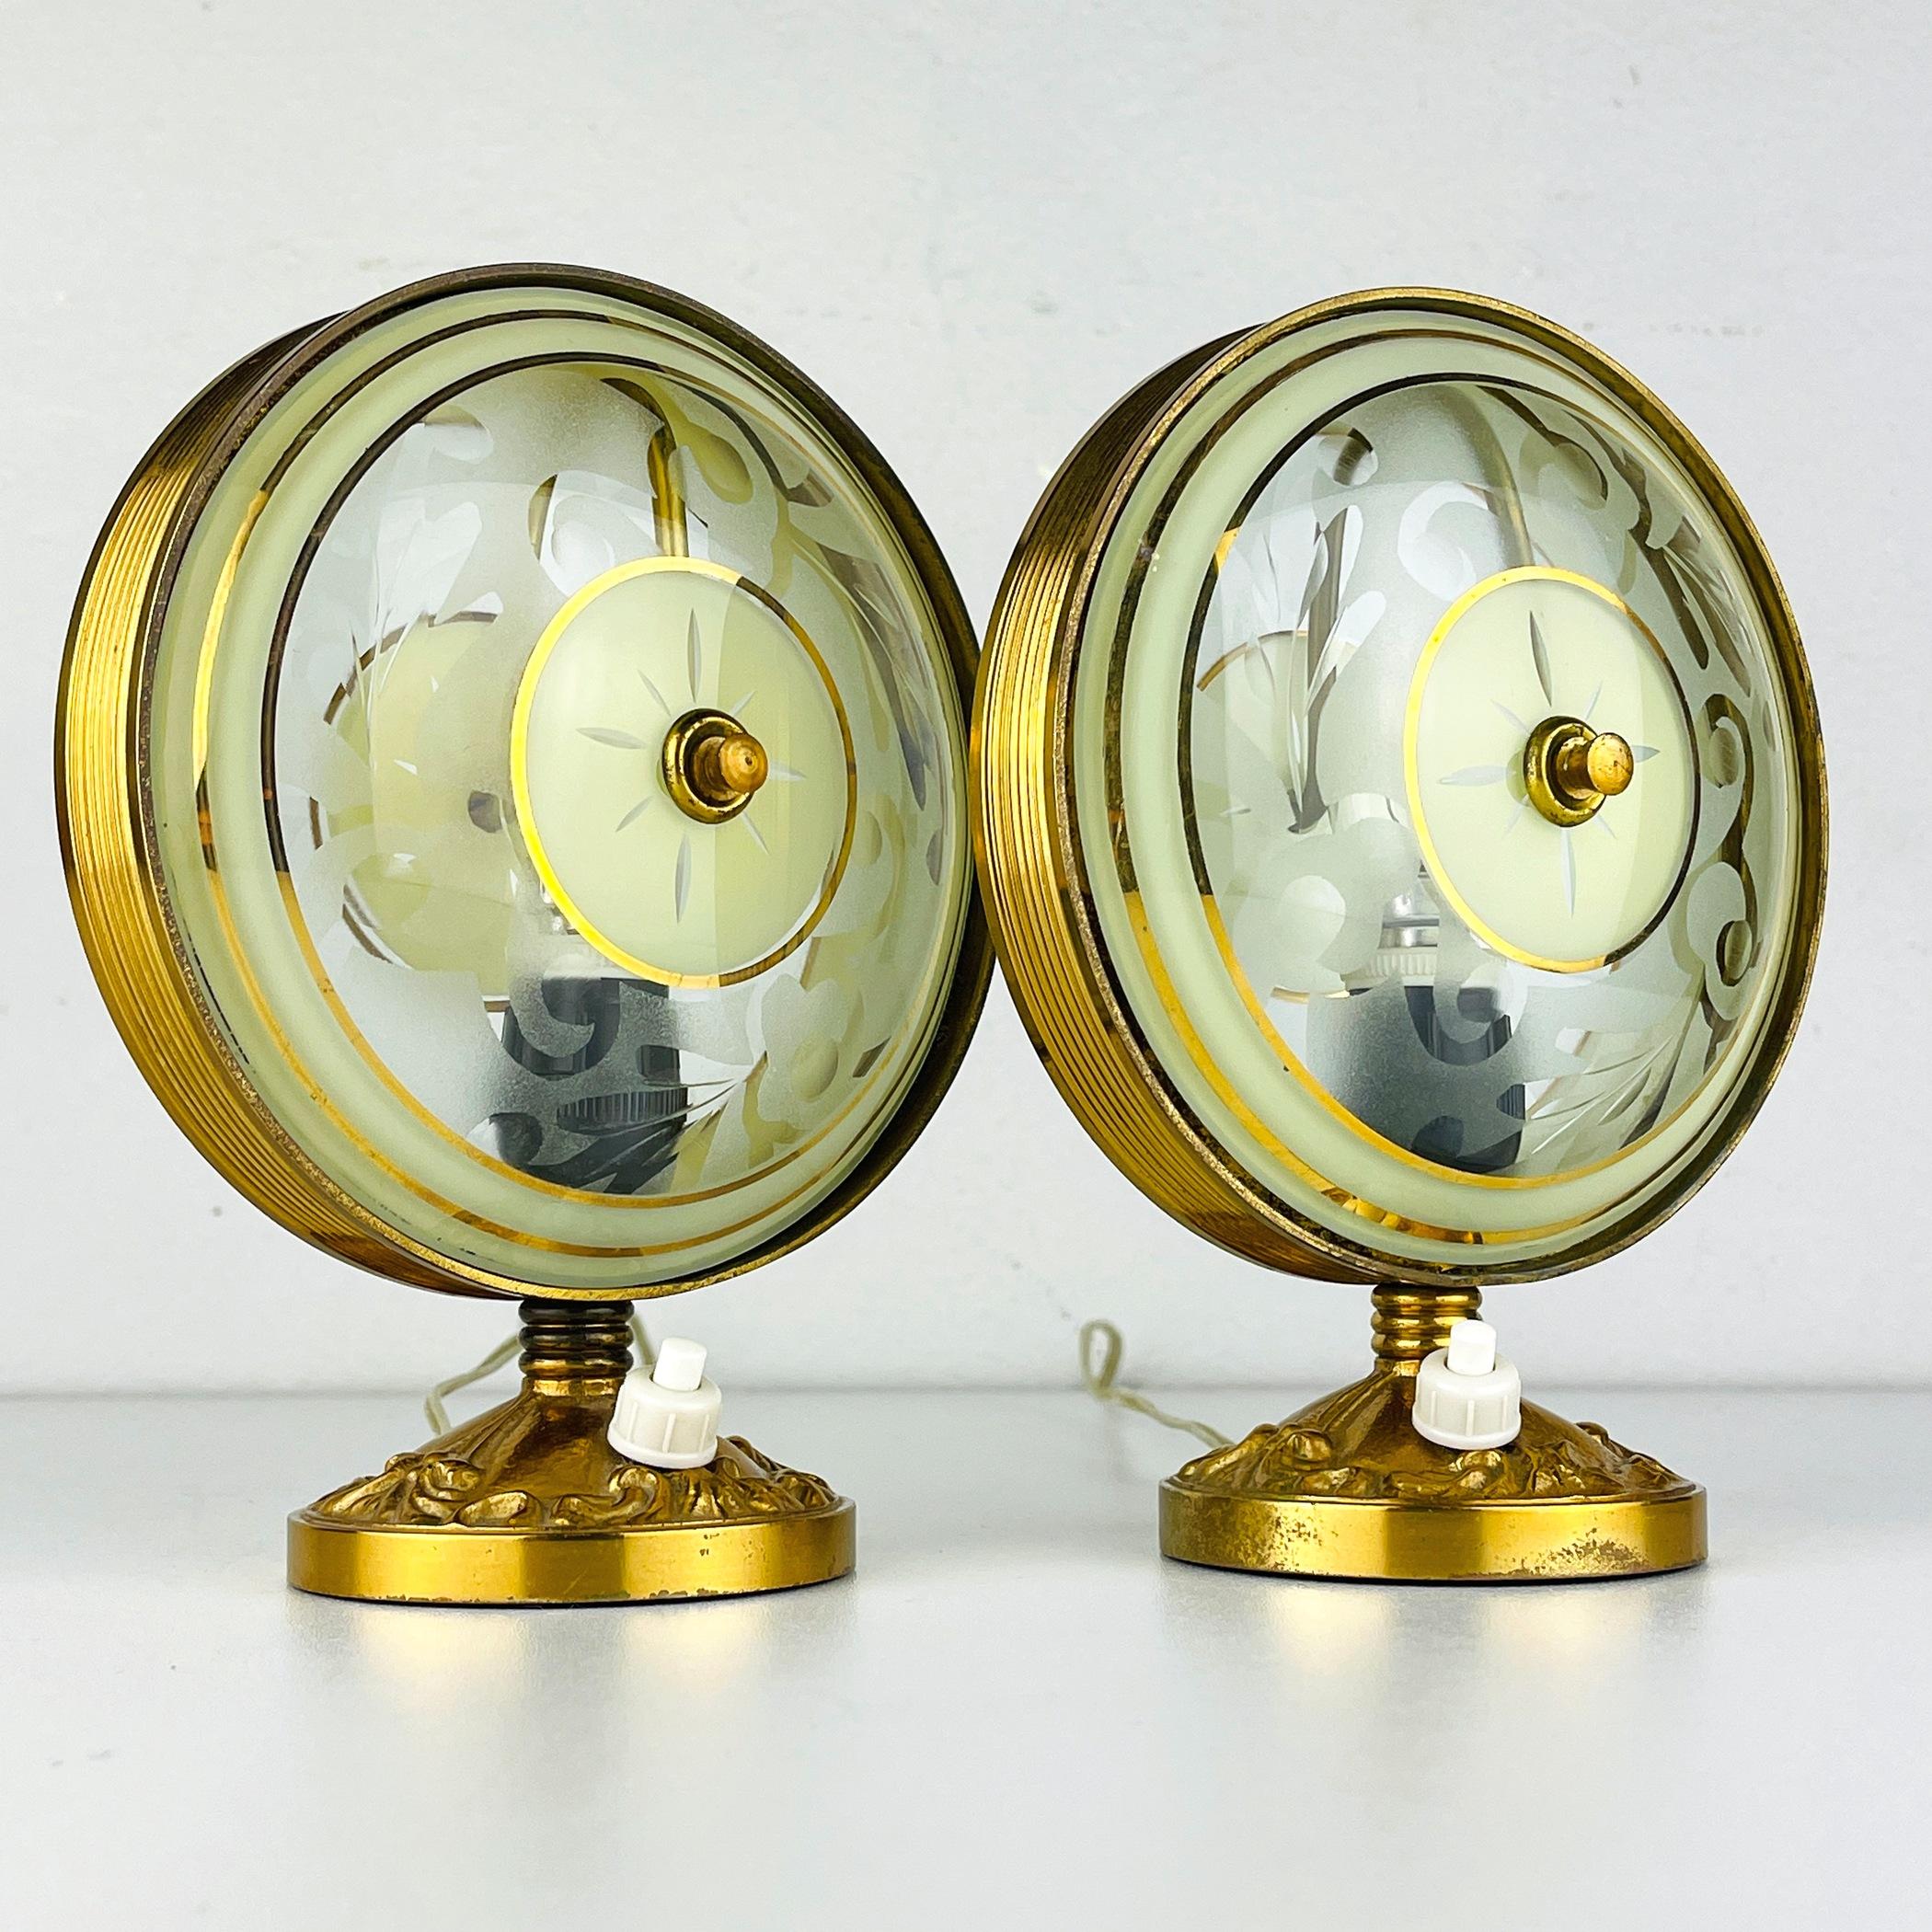 The pair of charming table lamps made in Italy in the 50s. Their beautiful color and light patina give them grace and charm. These table lamps will fit in the bedroom, nursery, and living room. Requires standard E14 bulbs. Bulbs are not included.